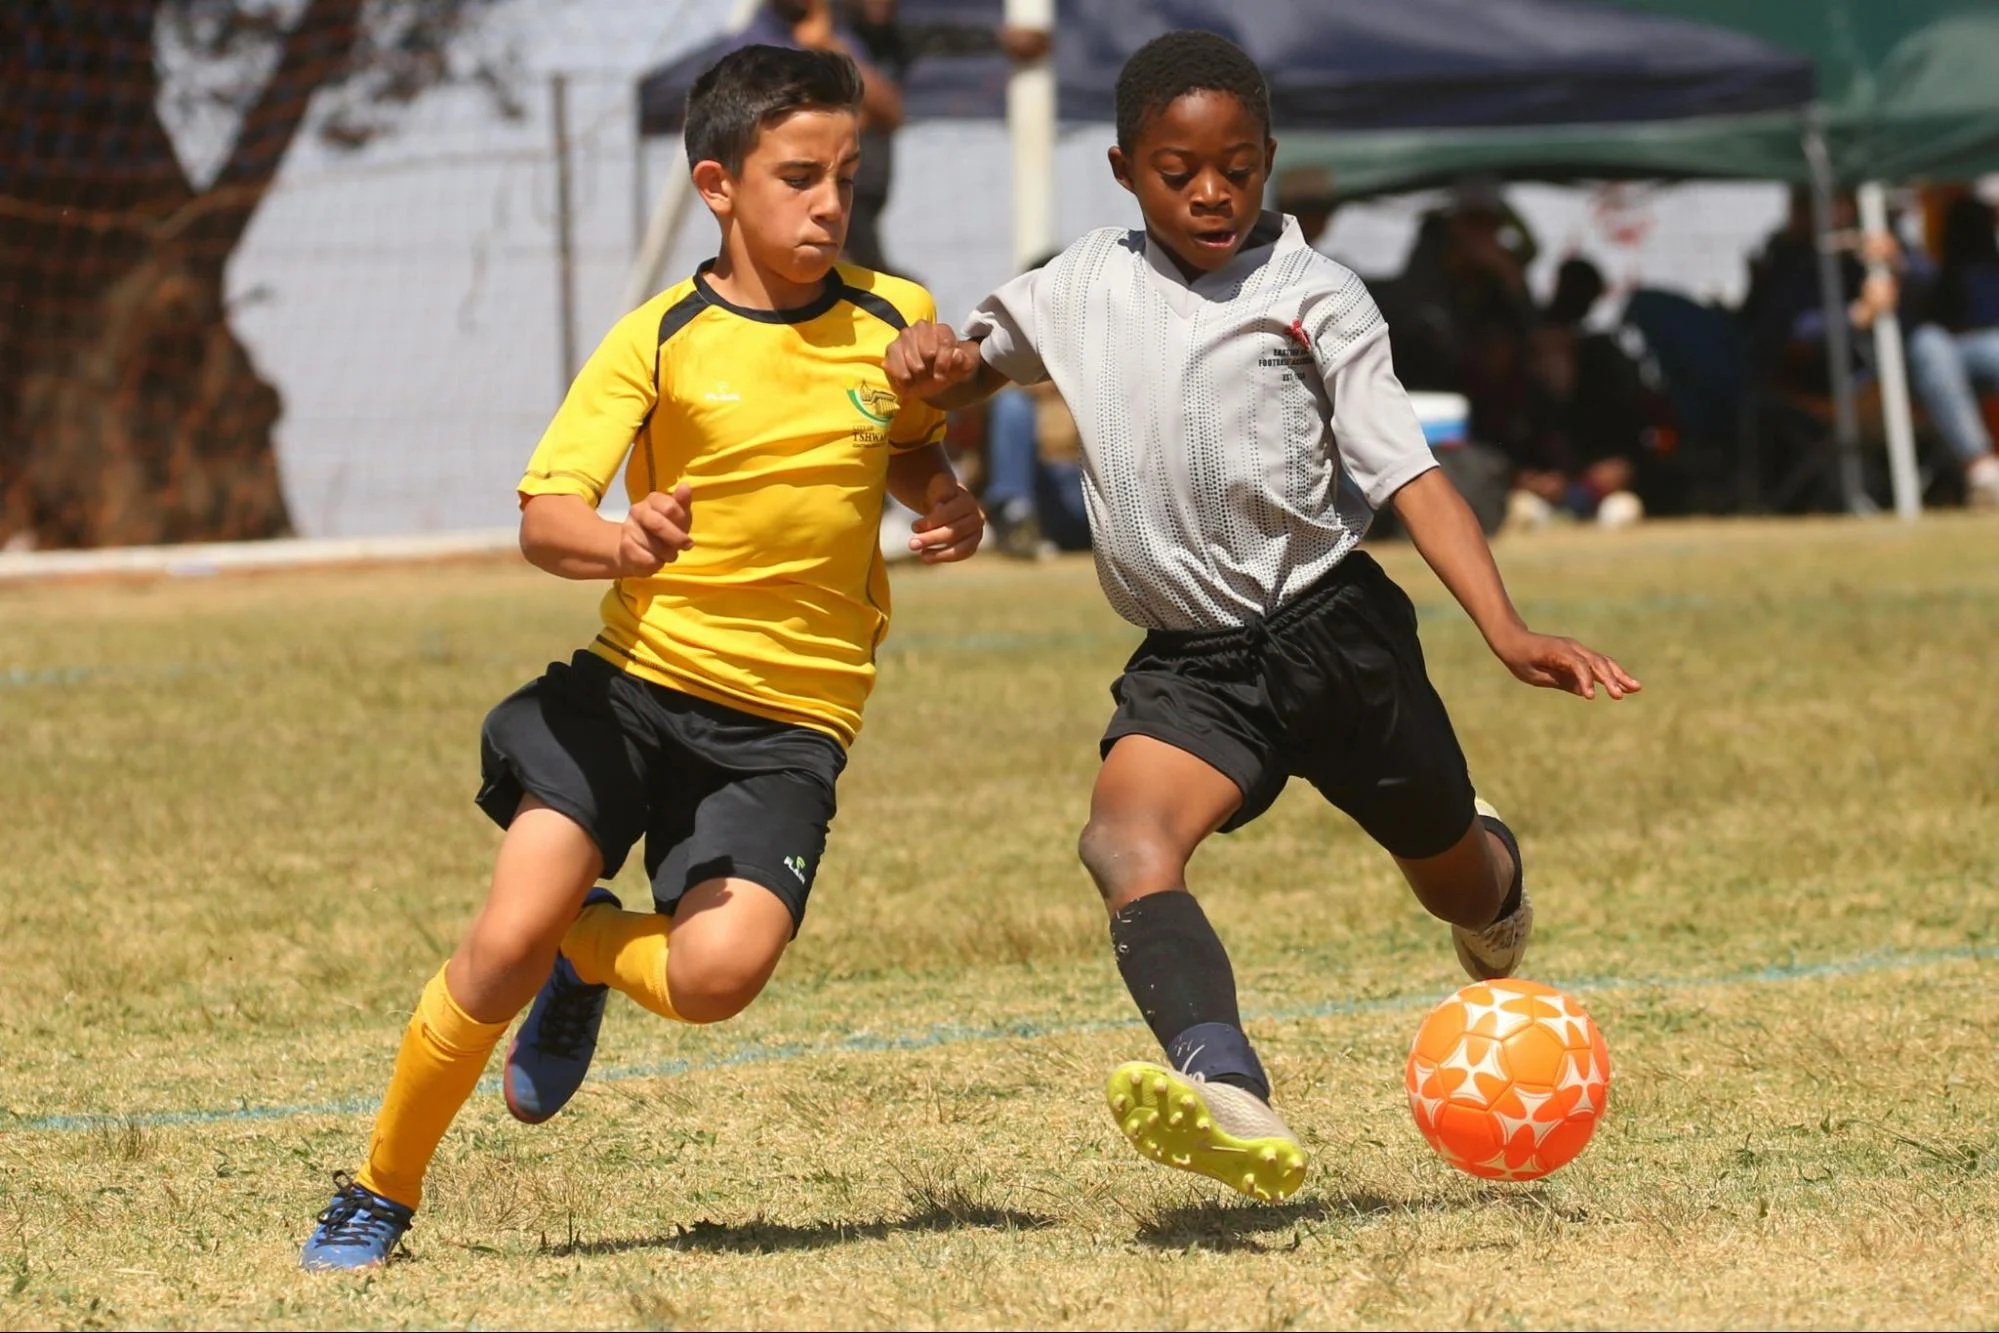 youth soccer players challenging for the ball